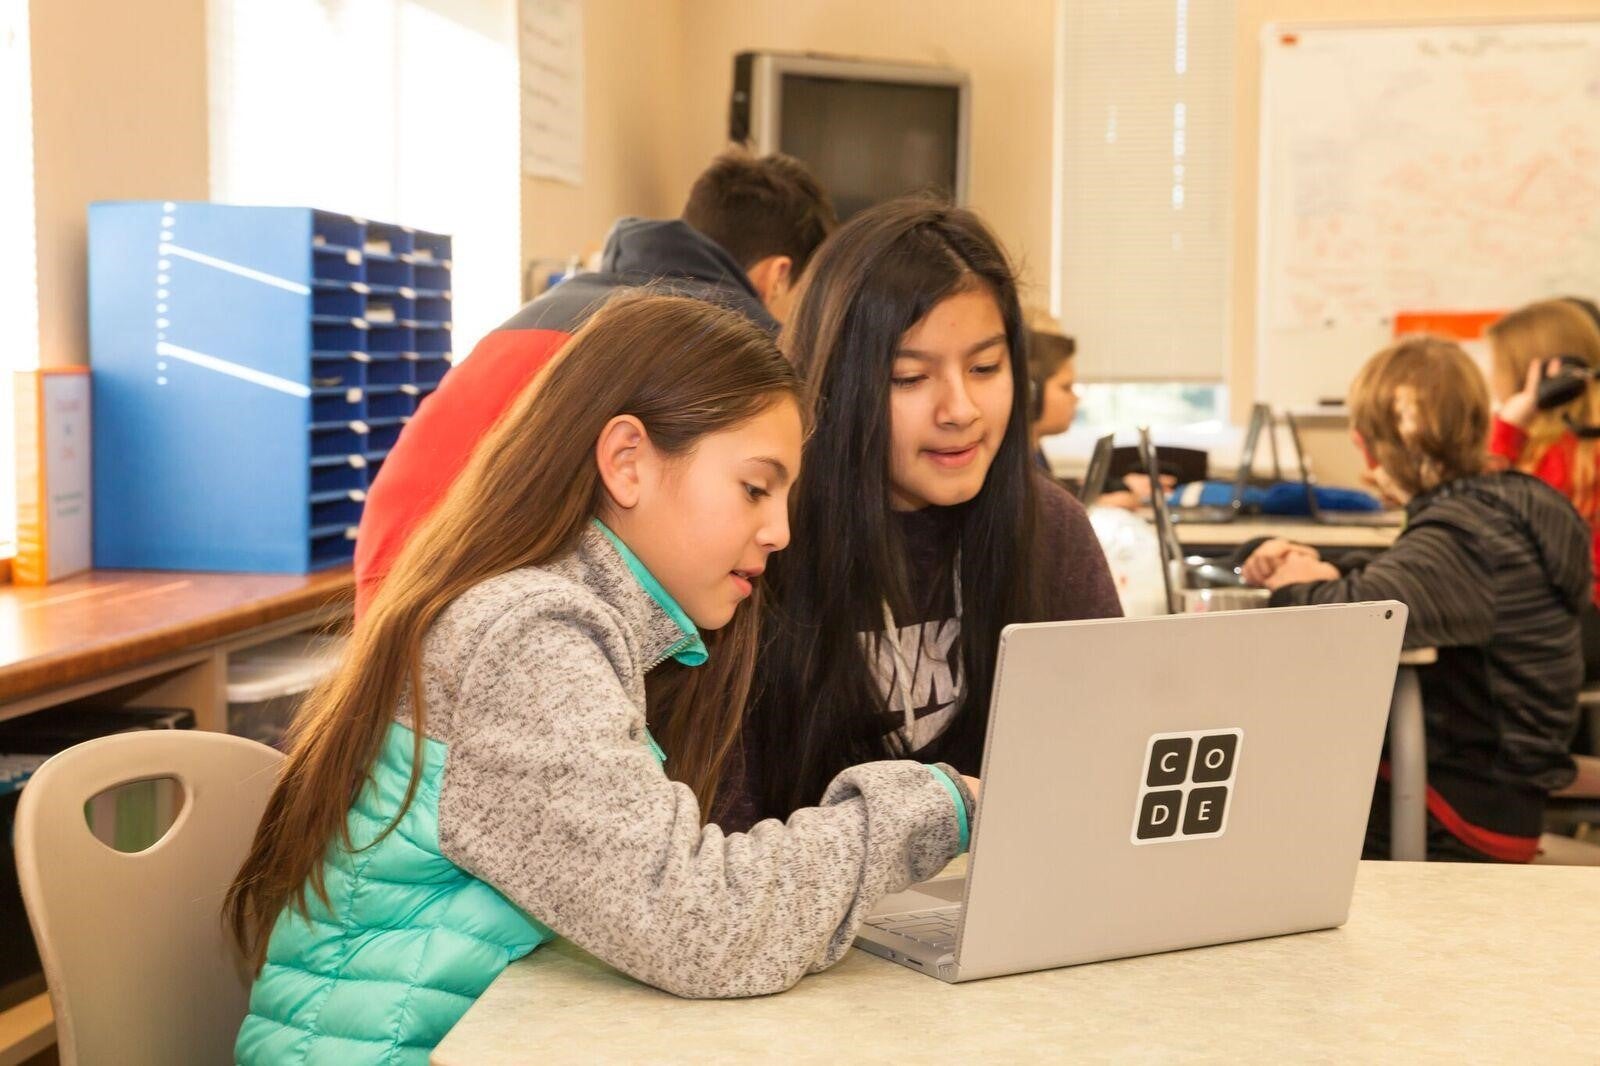 In the last few years, schools globally have made real strides towards gender equality in computer science. 